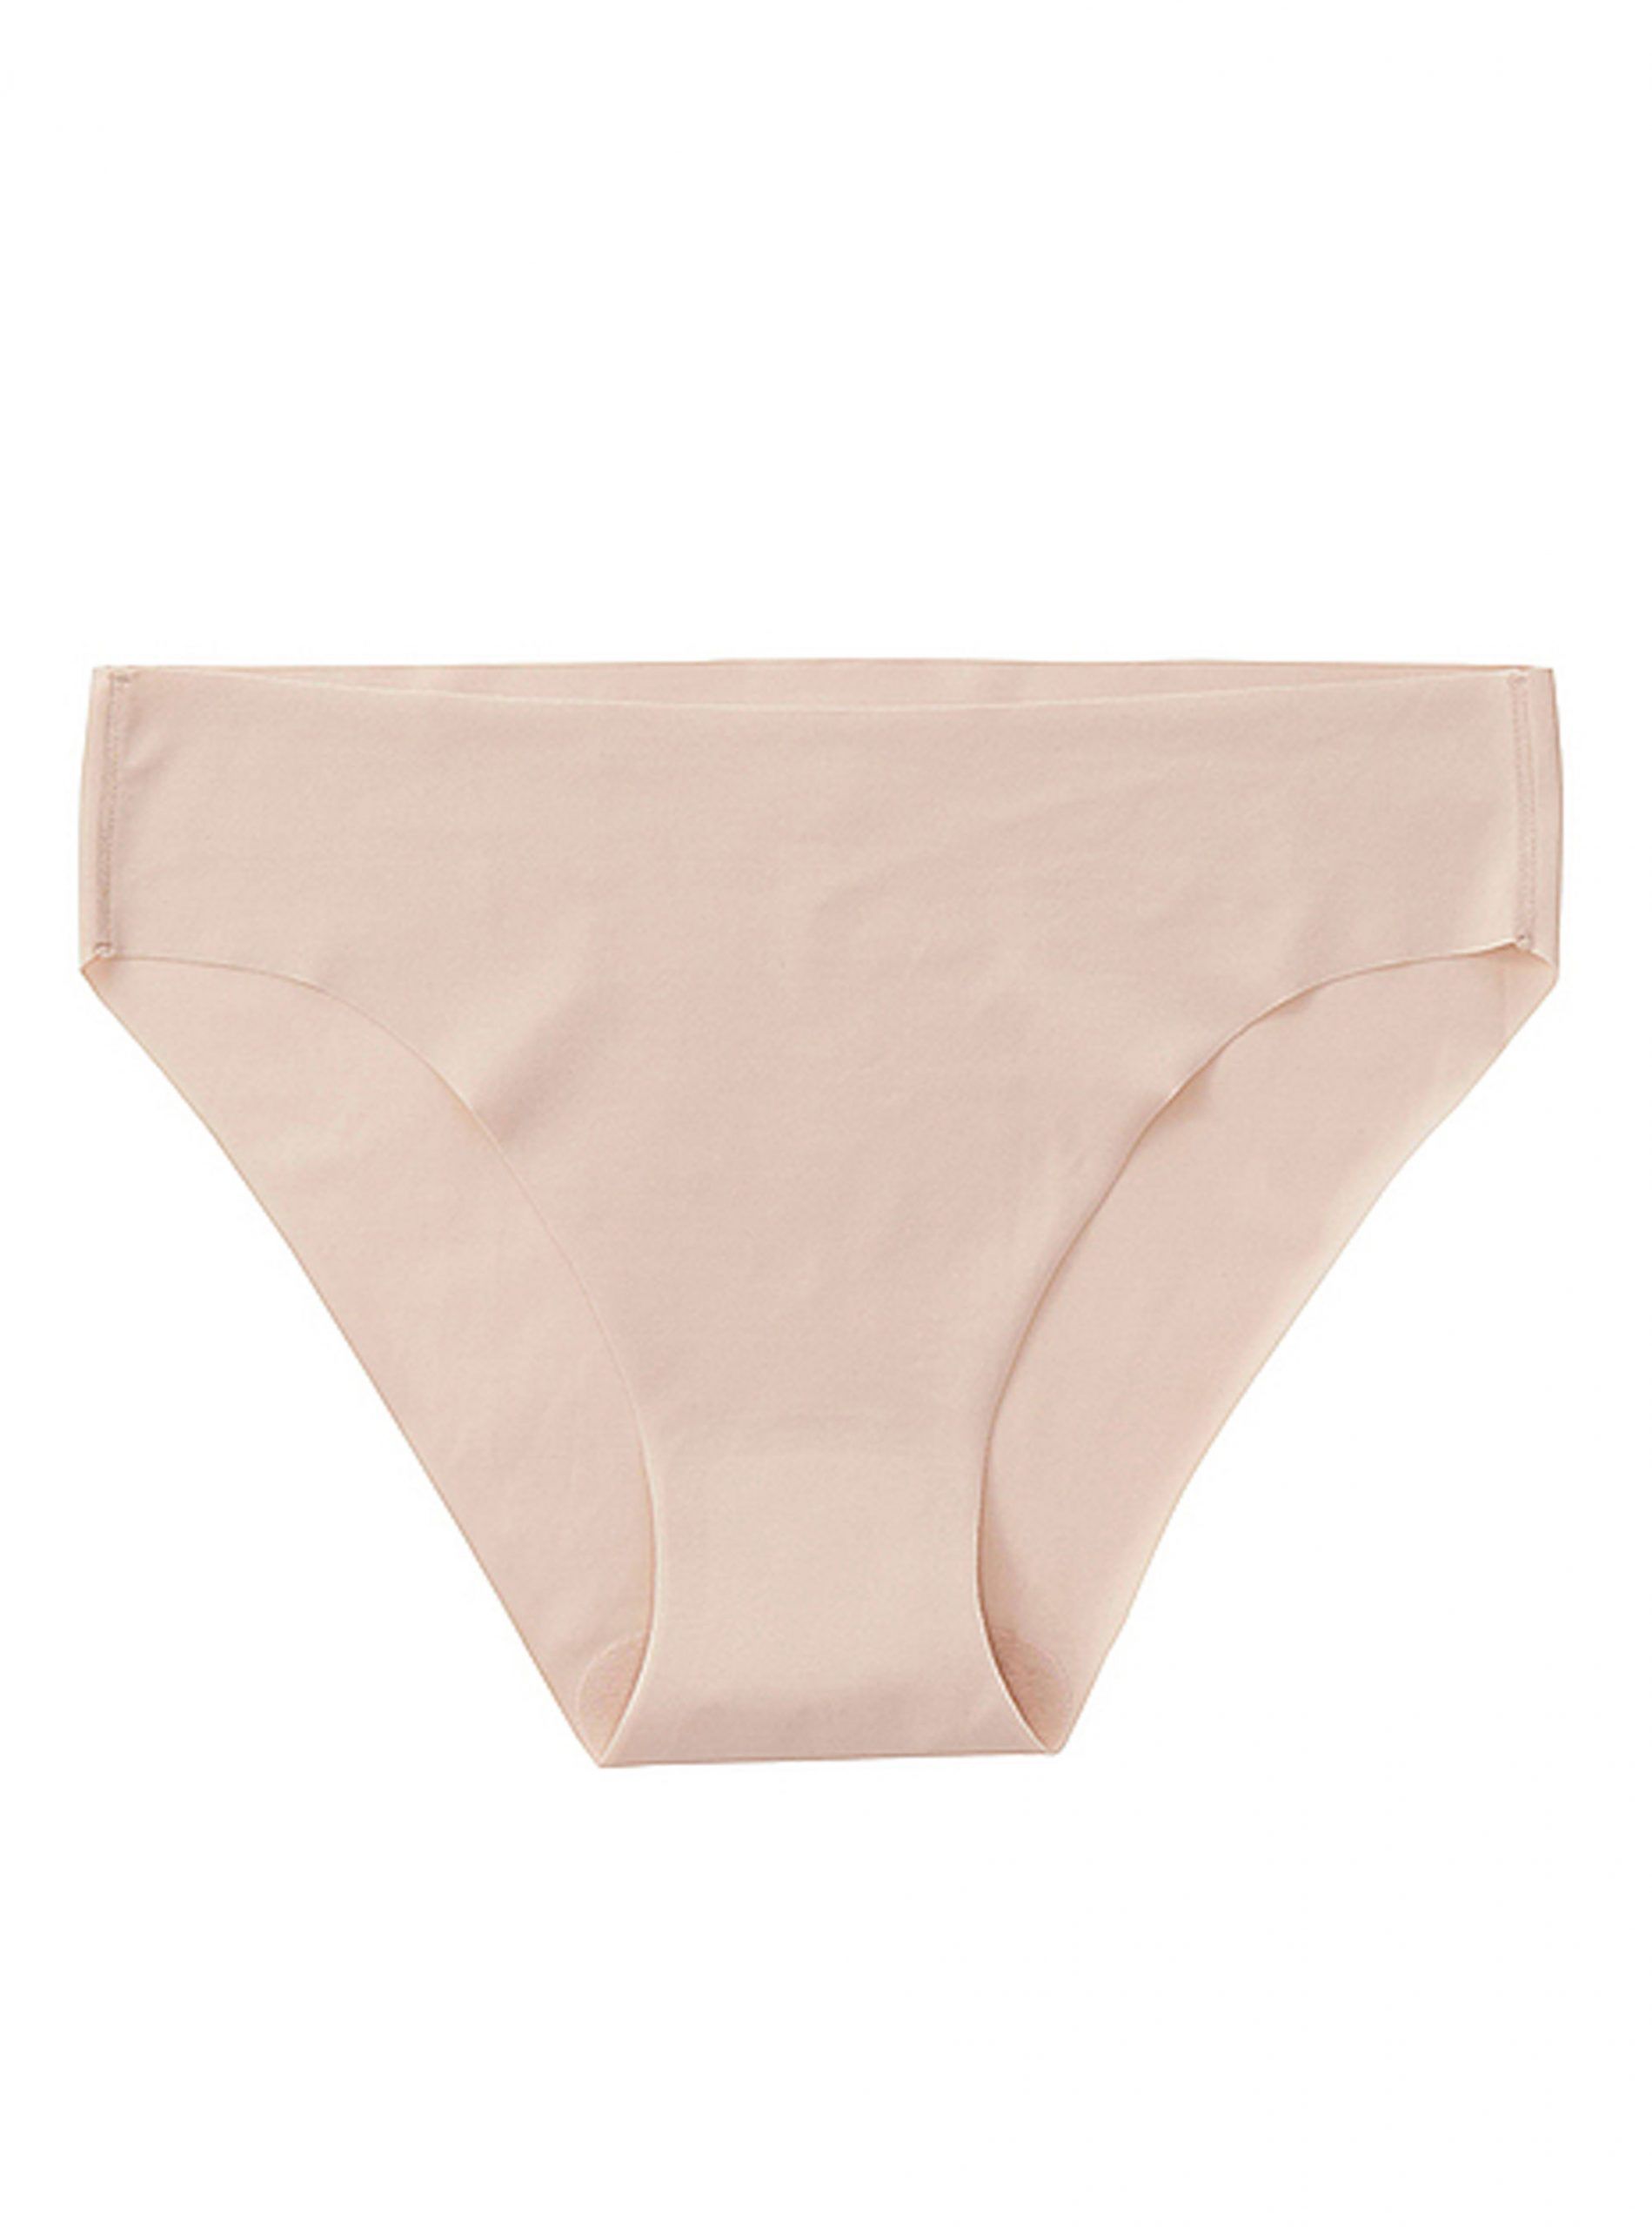 The Best Invisible Knickers | Woman & Home